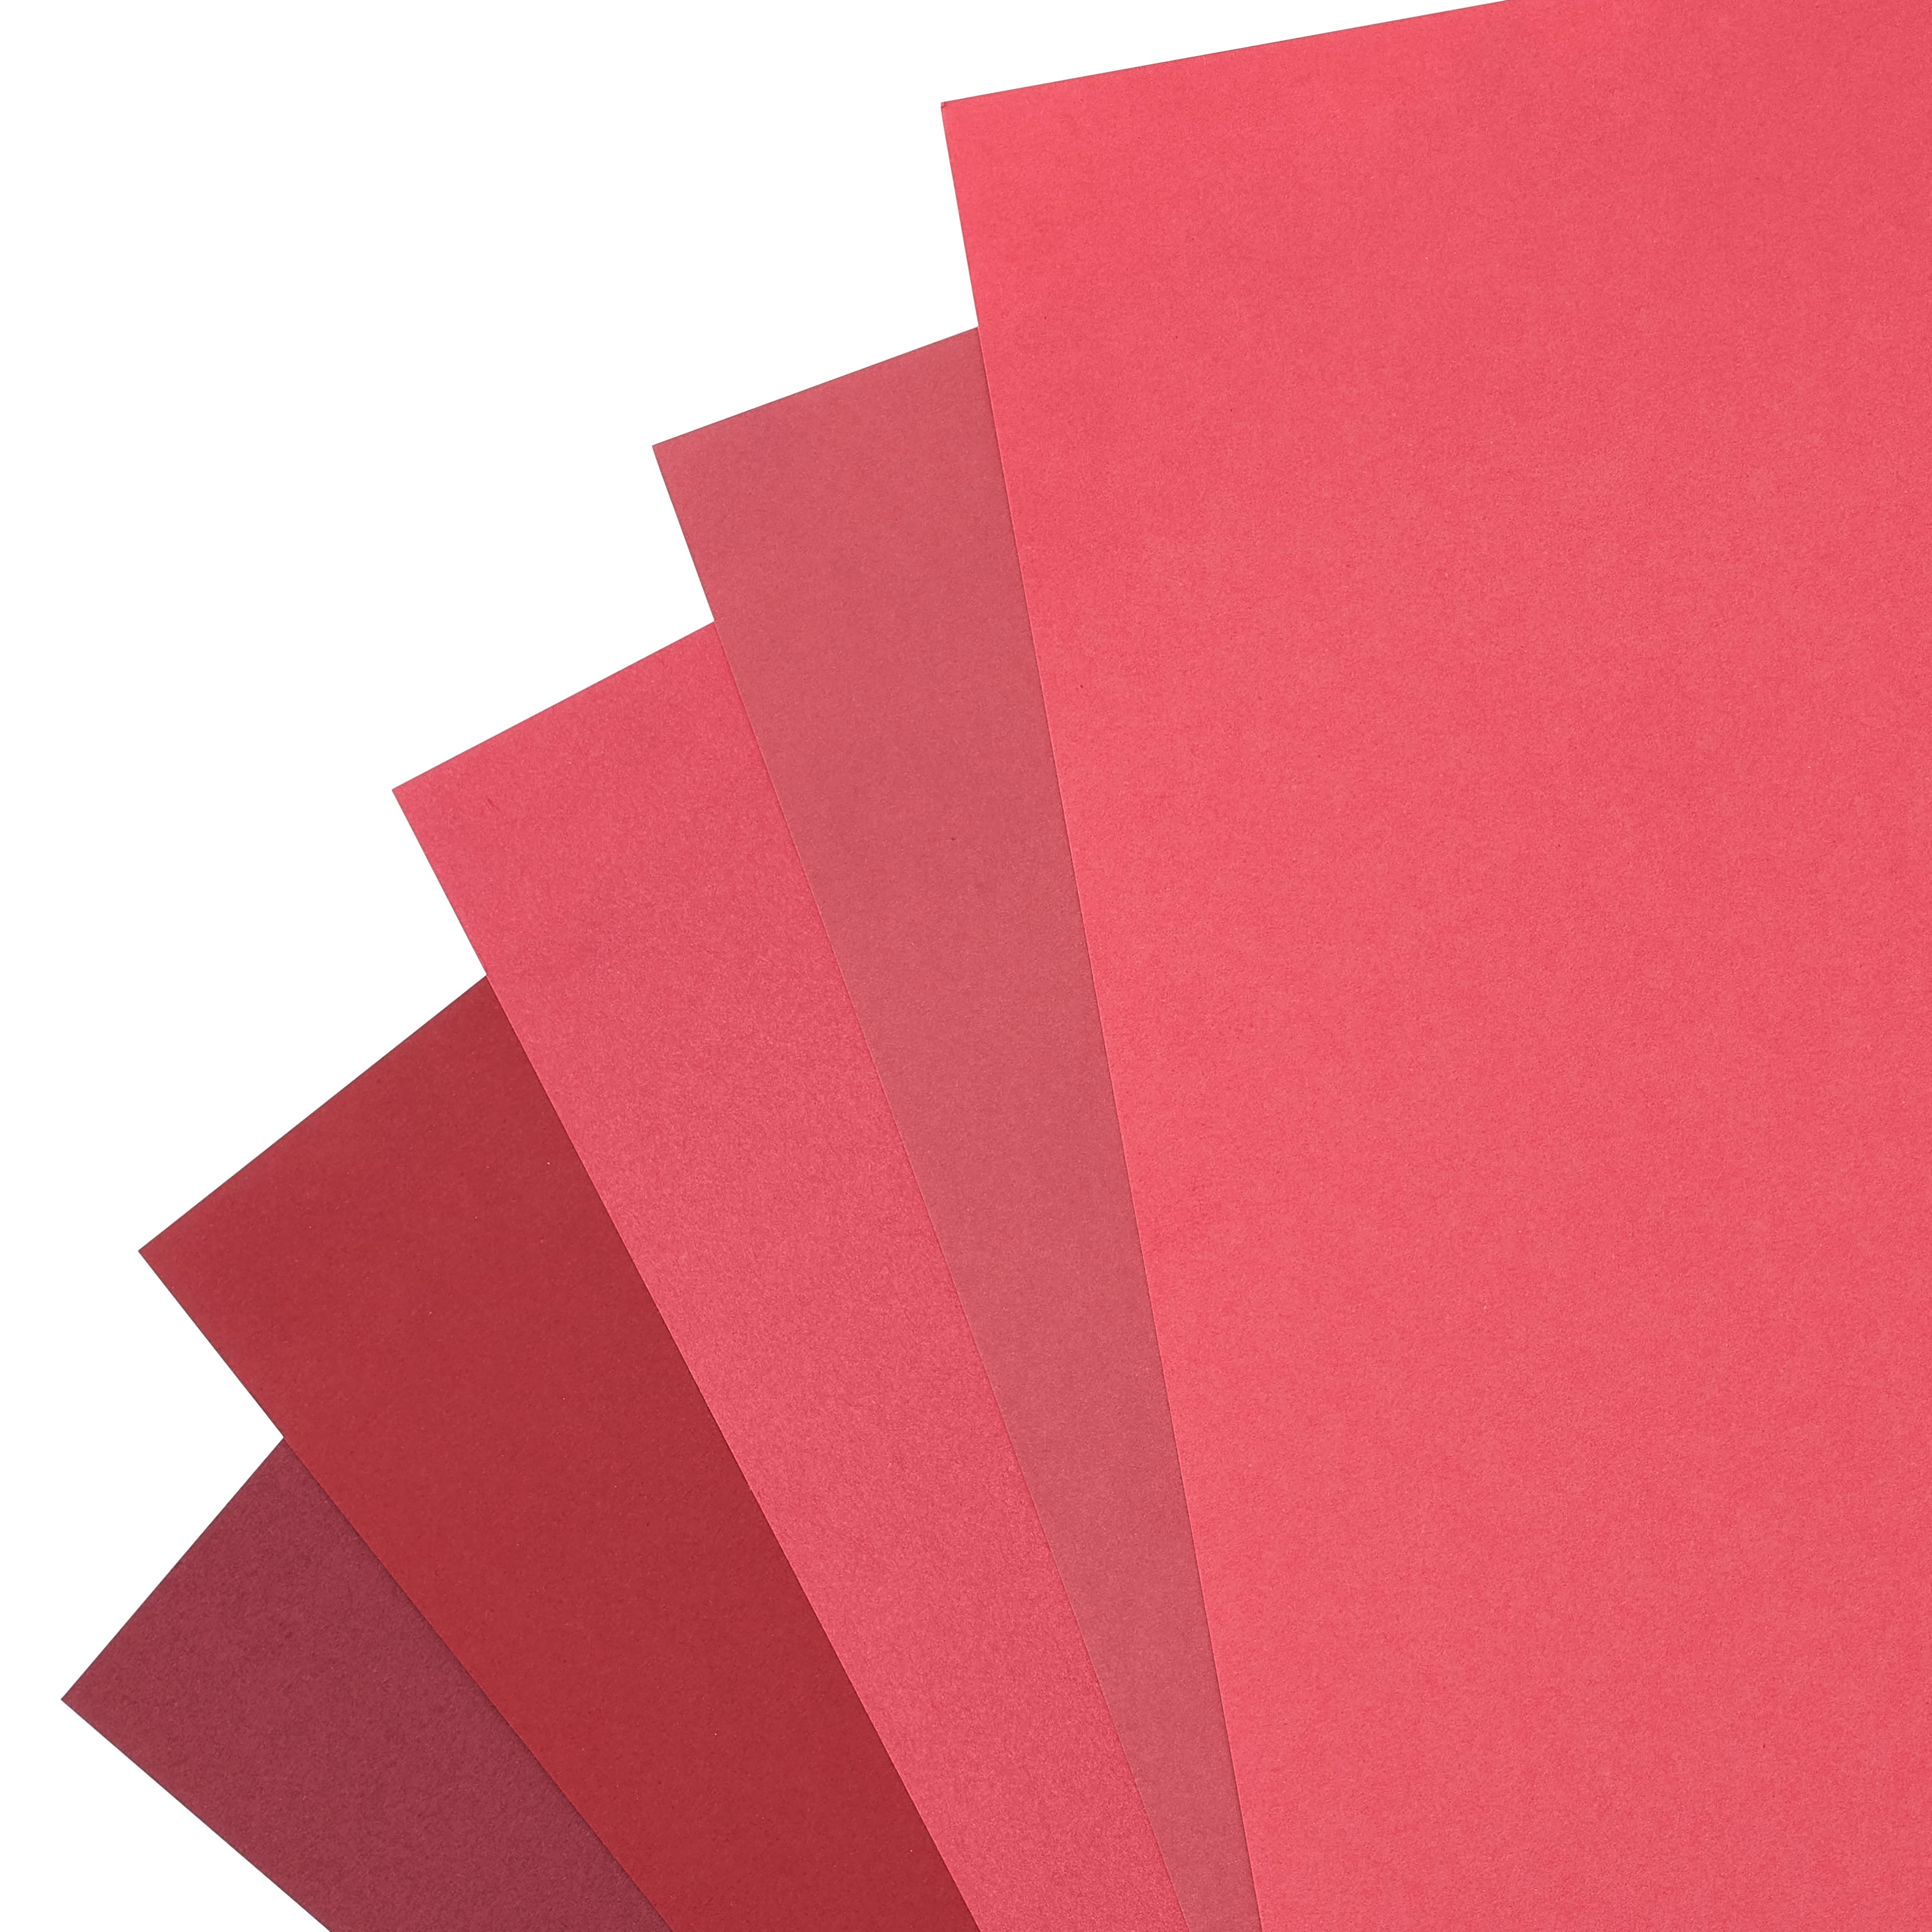 Recollections Red Cardstock Paper 8 1/2 x 11 100 Sheets 110 lb HEAVYWEIGHT